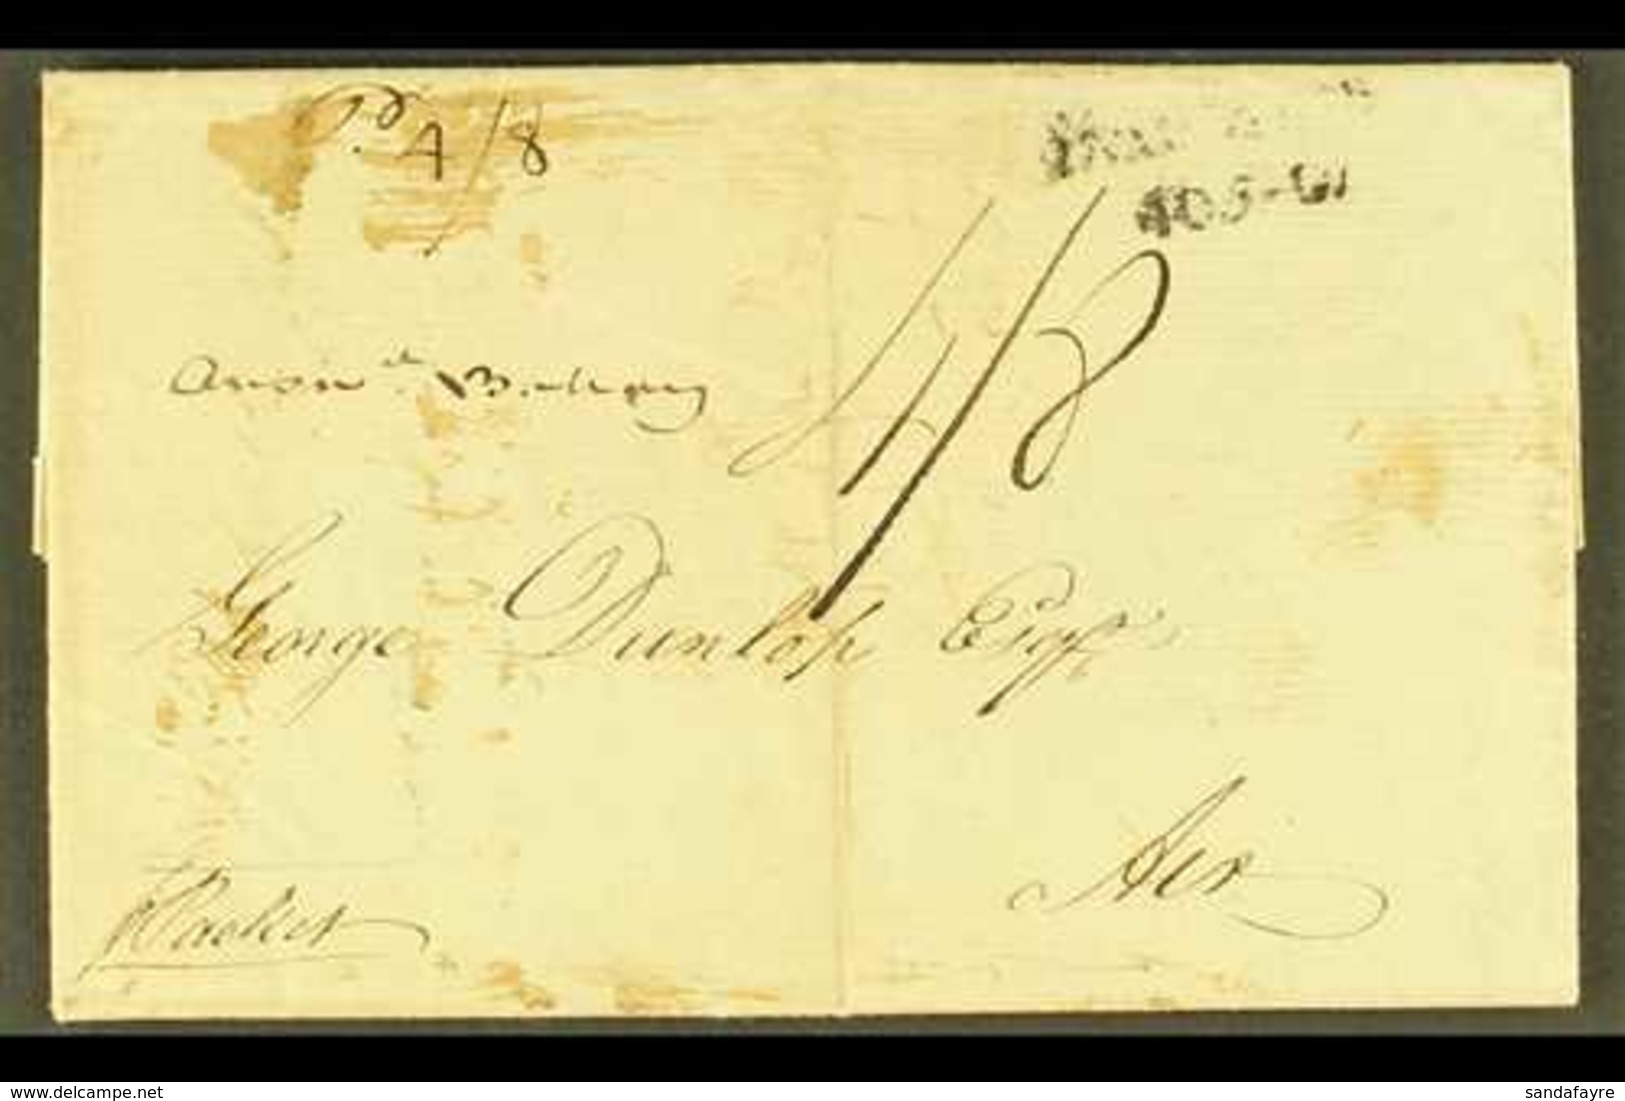 1812 ENTIRE TO SCOTLAND  1812 (4 FEB) Entire Letter Addressed To George Dunlop At Ayr, With Manuscript "4/8" Rate And En - Grenade (...-1974)